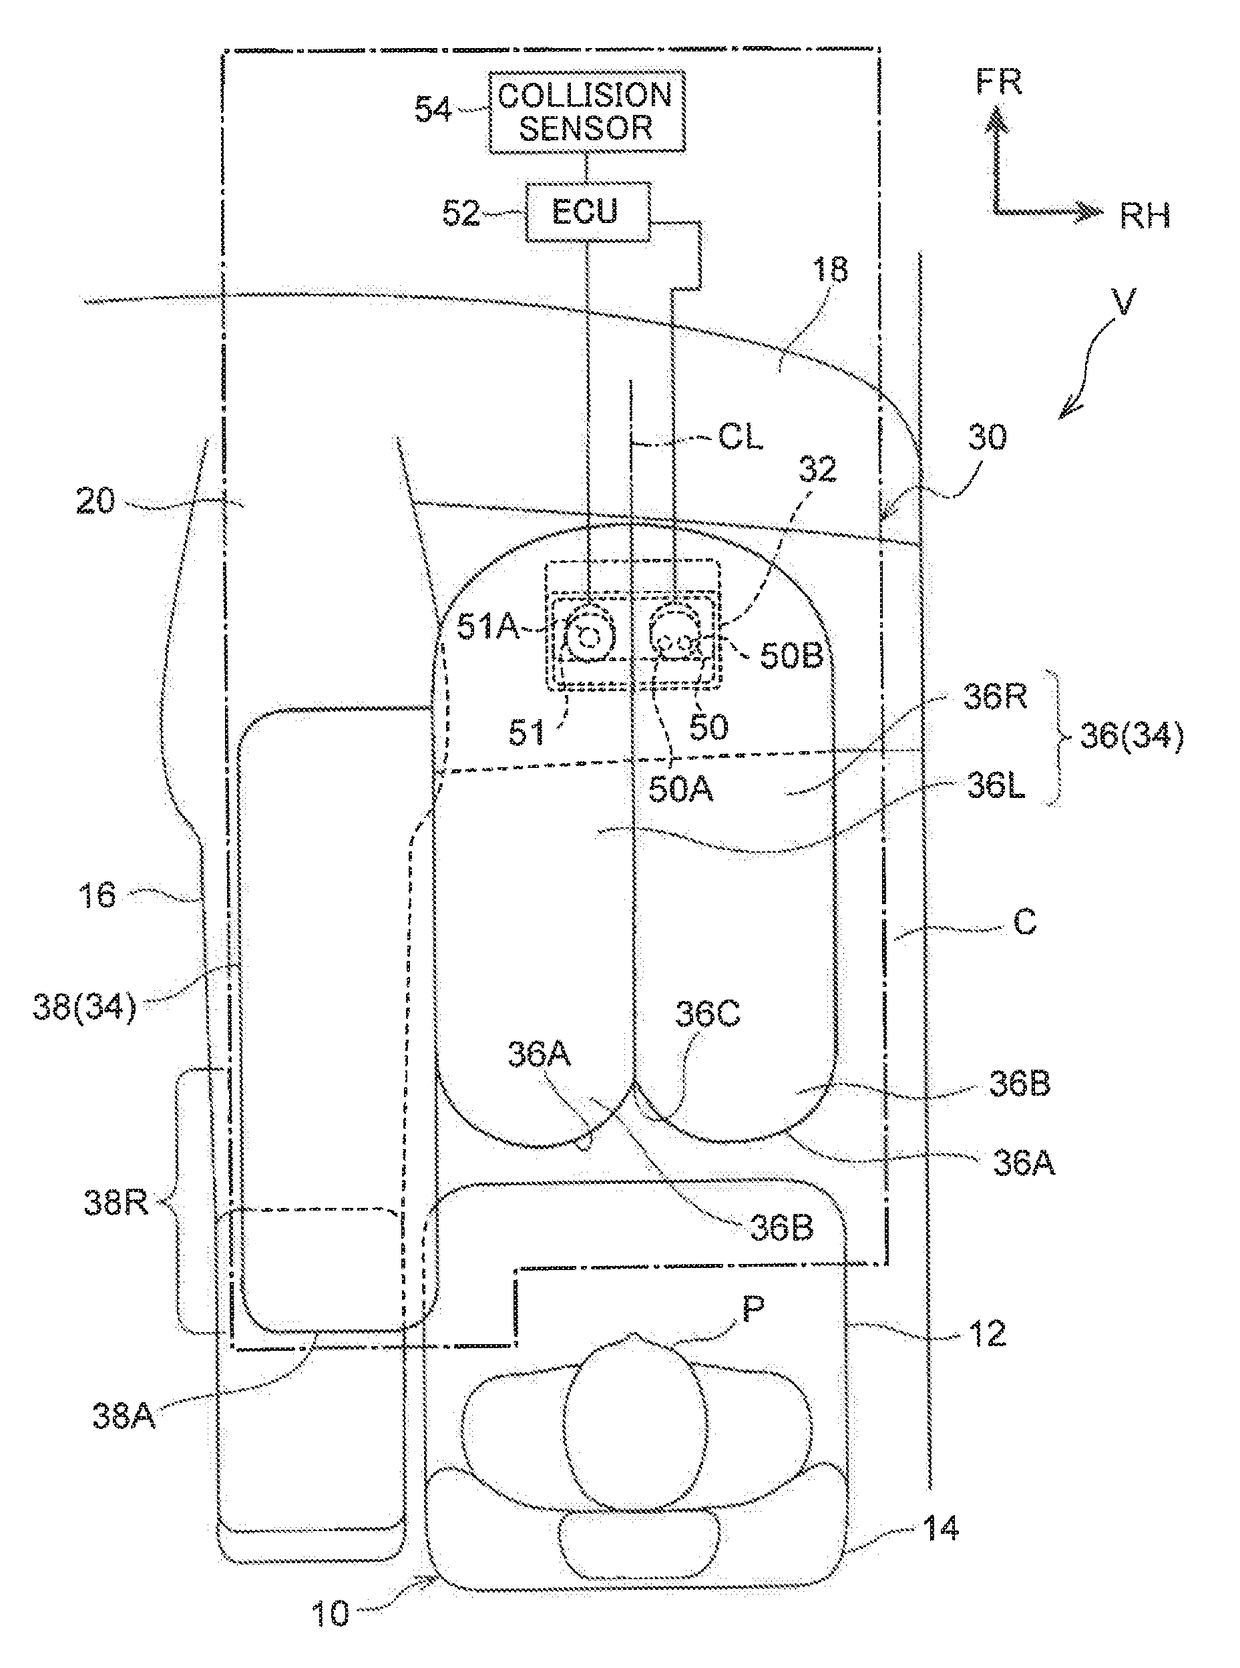 Vehicle front passenger seat airbag device